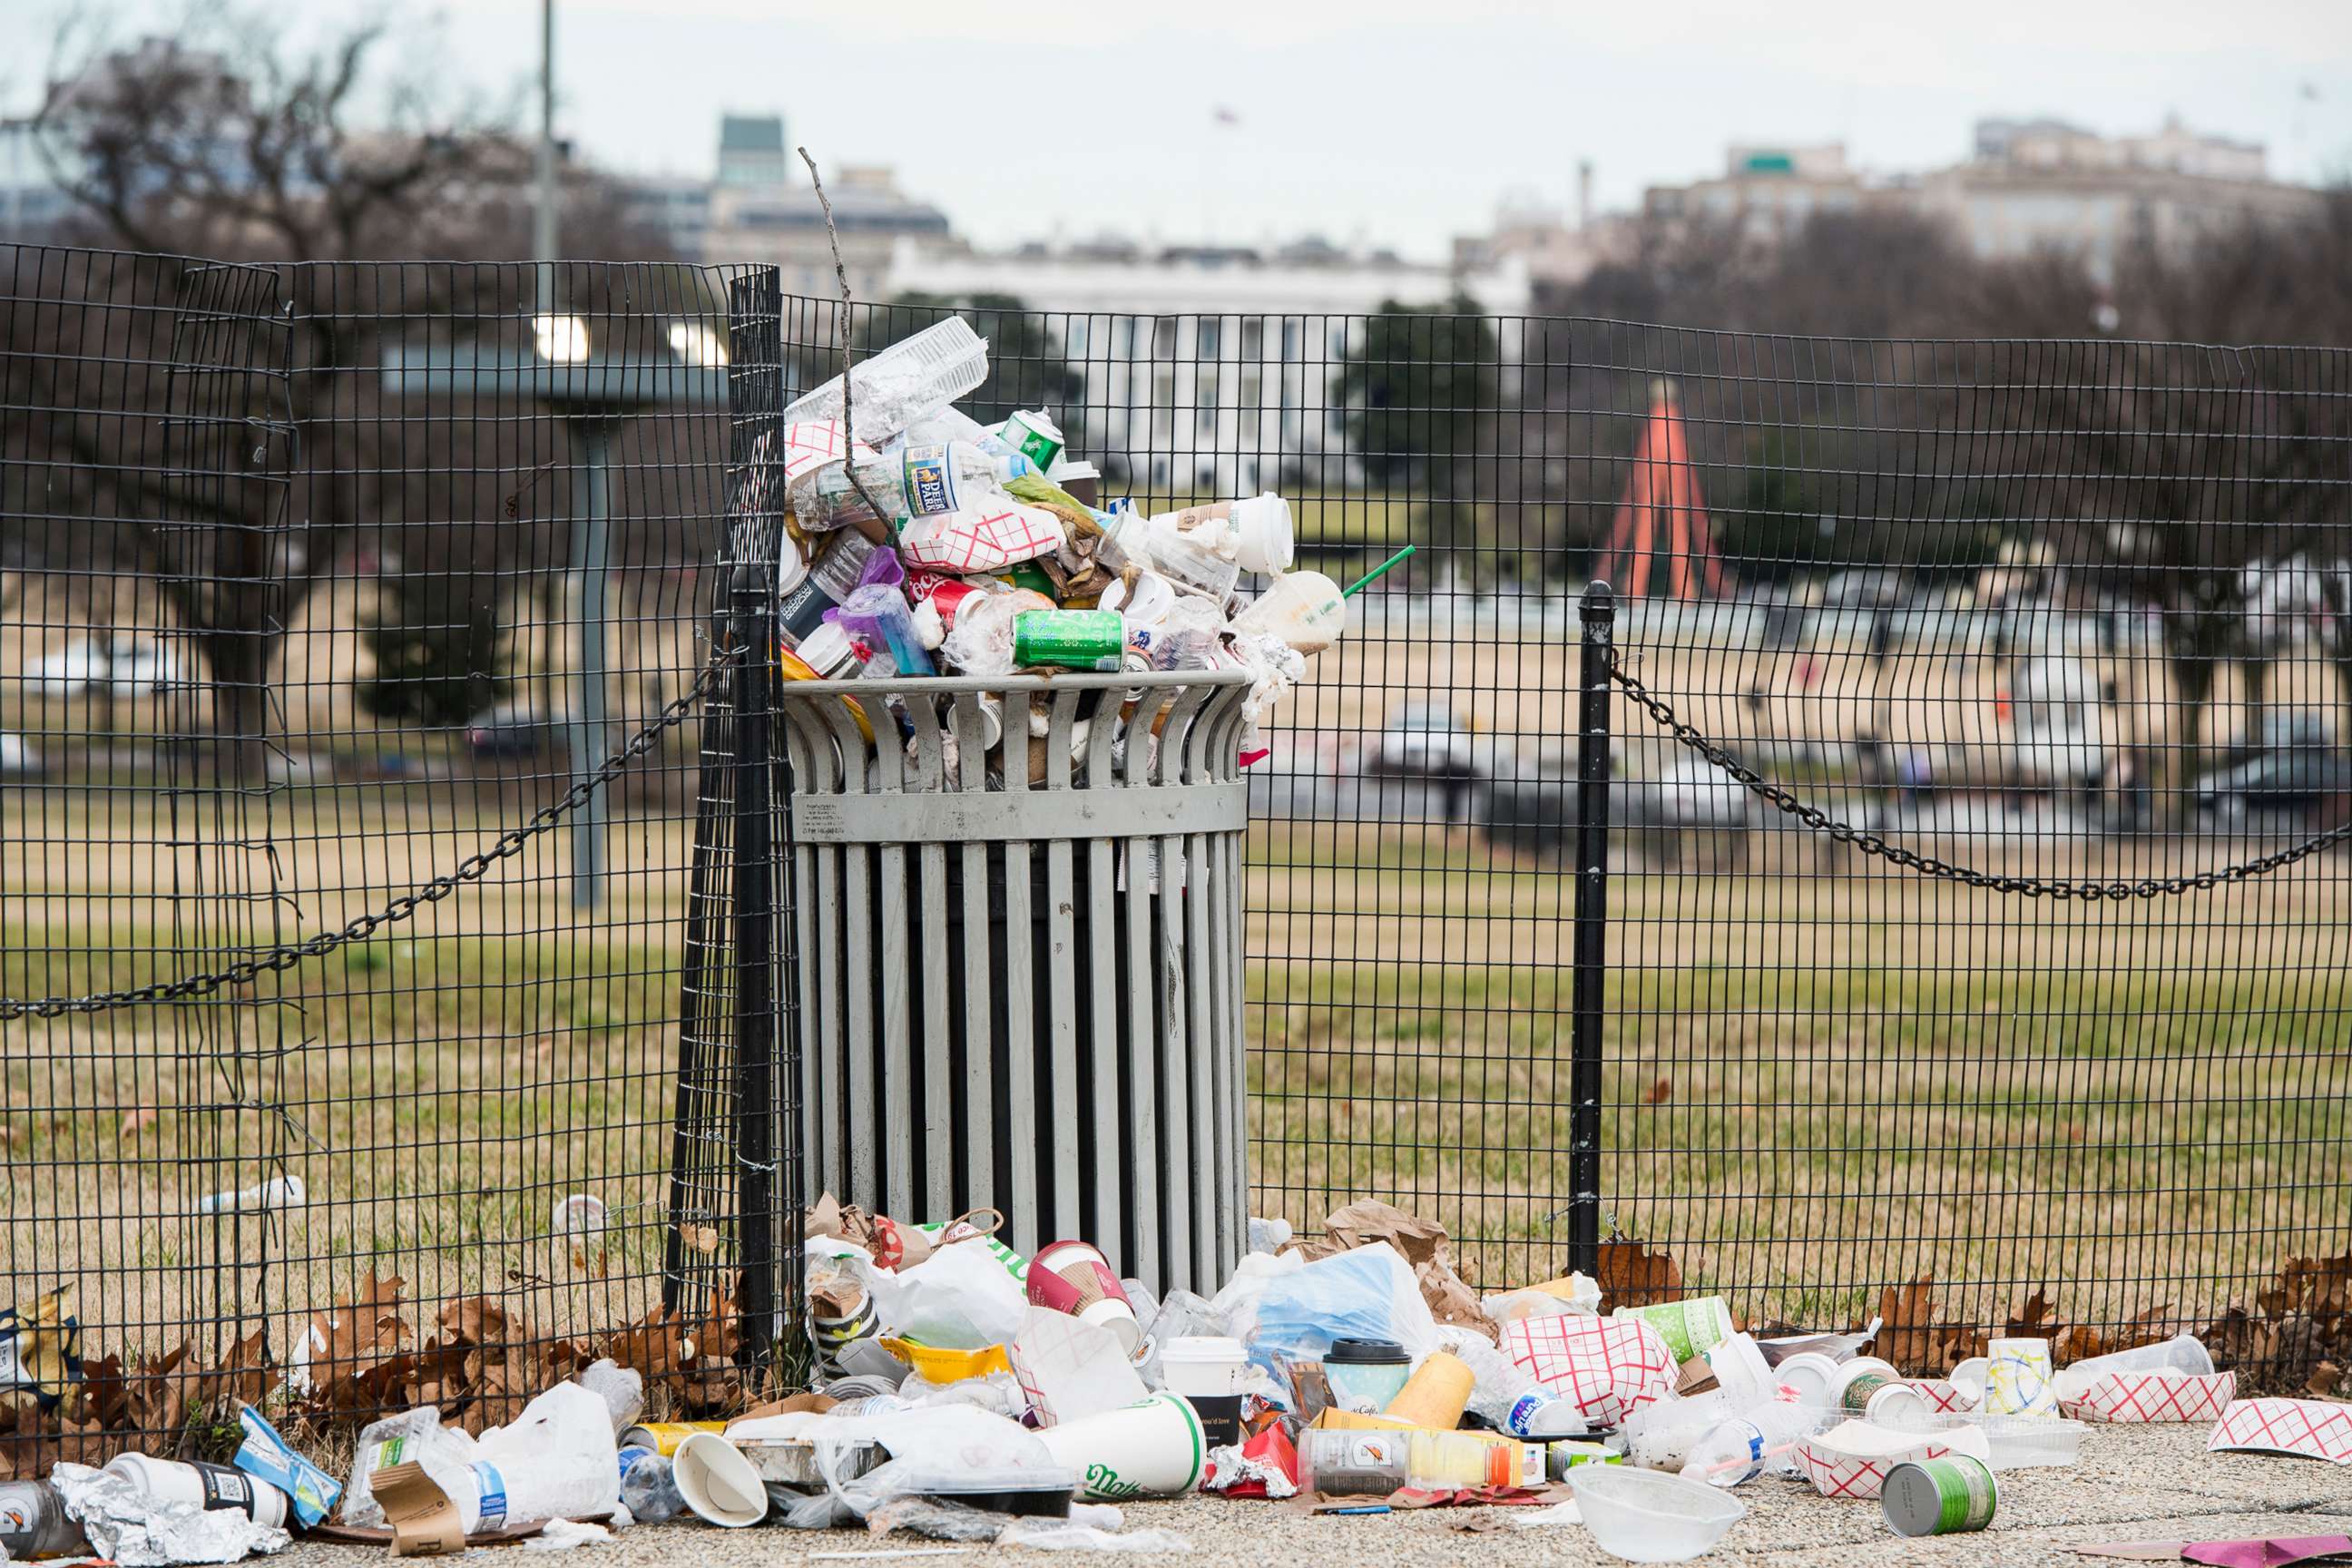 PHOTO: Garbage overflows a trash can on the National Mall across from the White House, Jan. 1, 2019.